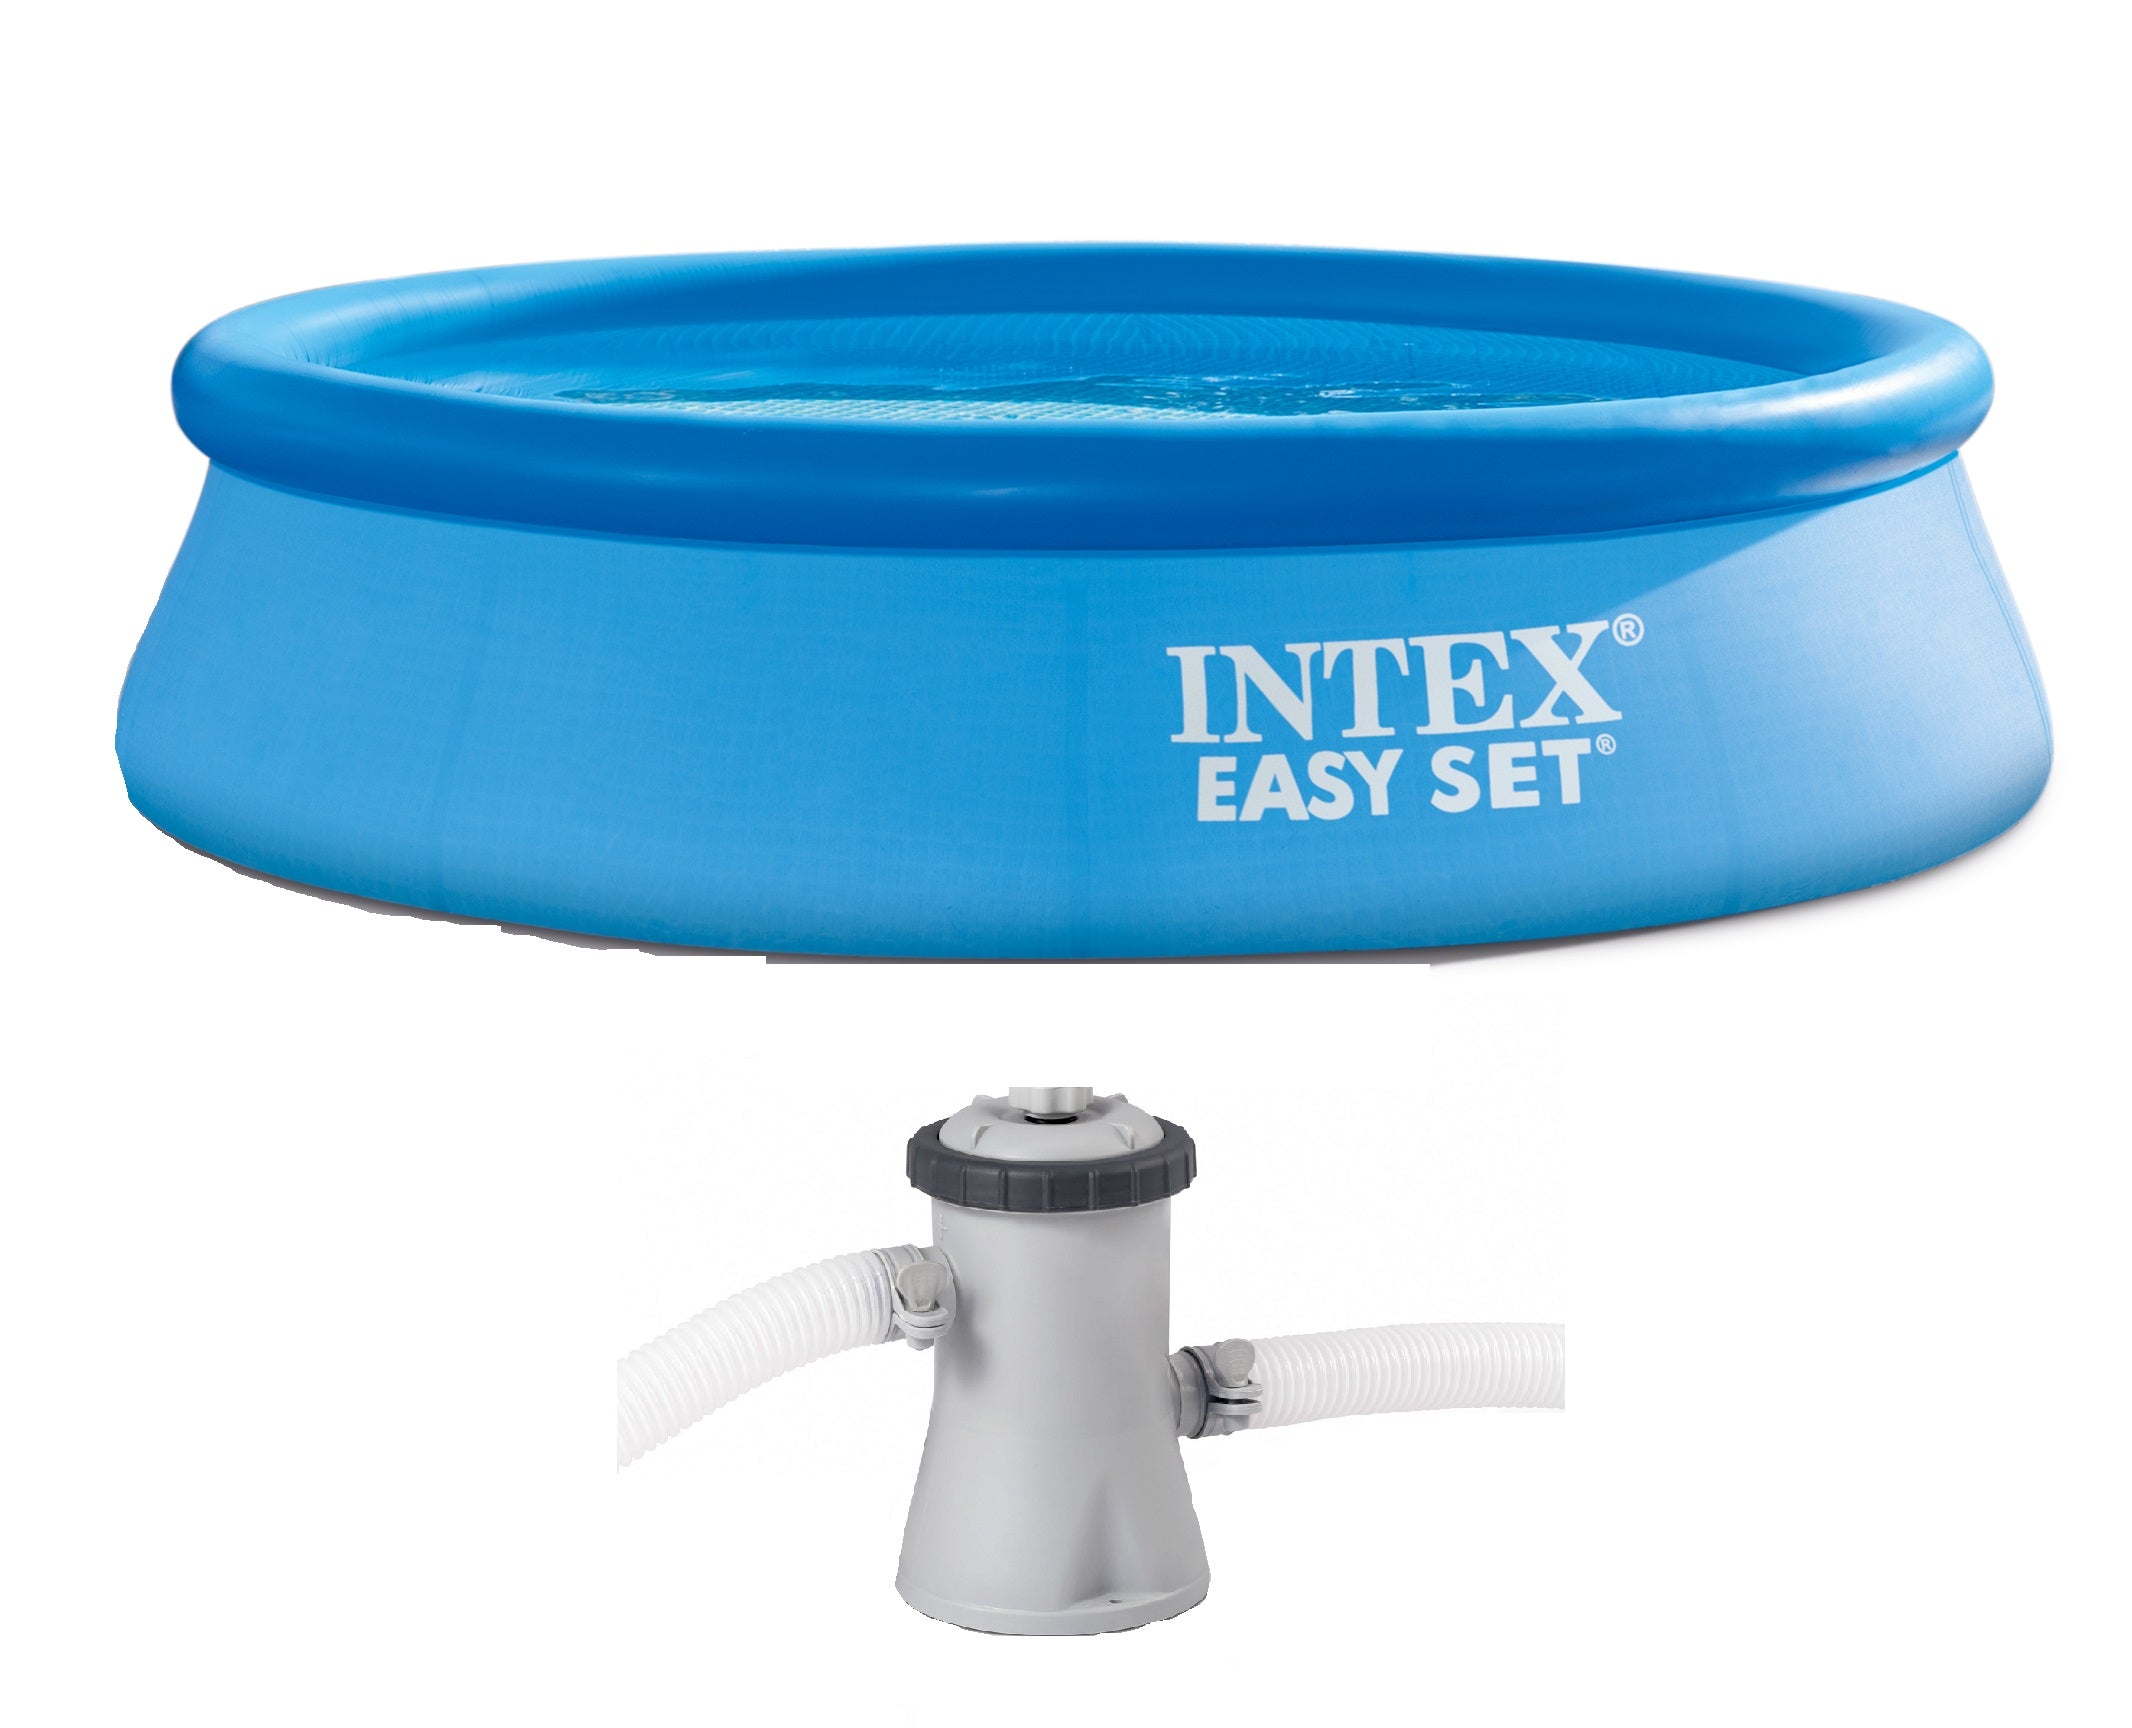 Intex Easy Set 10' X 30" Swimming Pool with Filter Pump